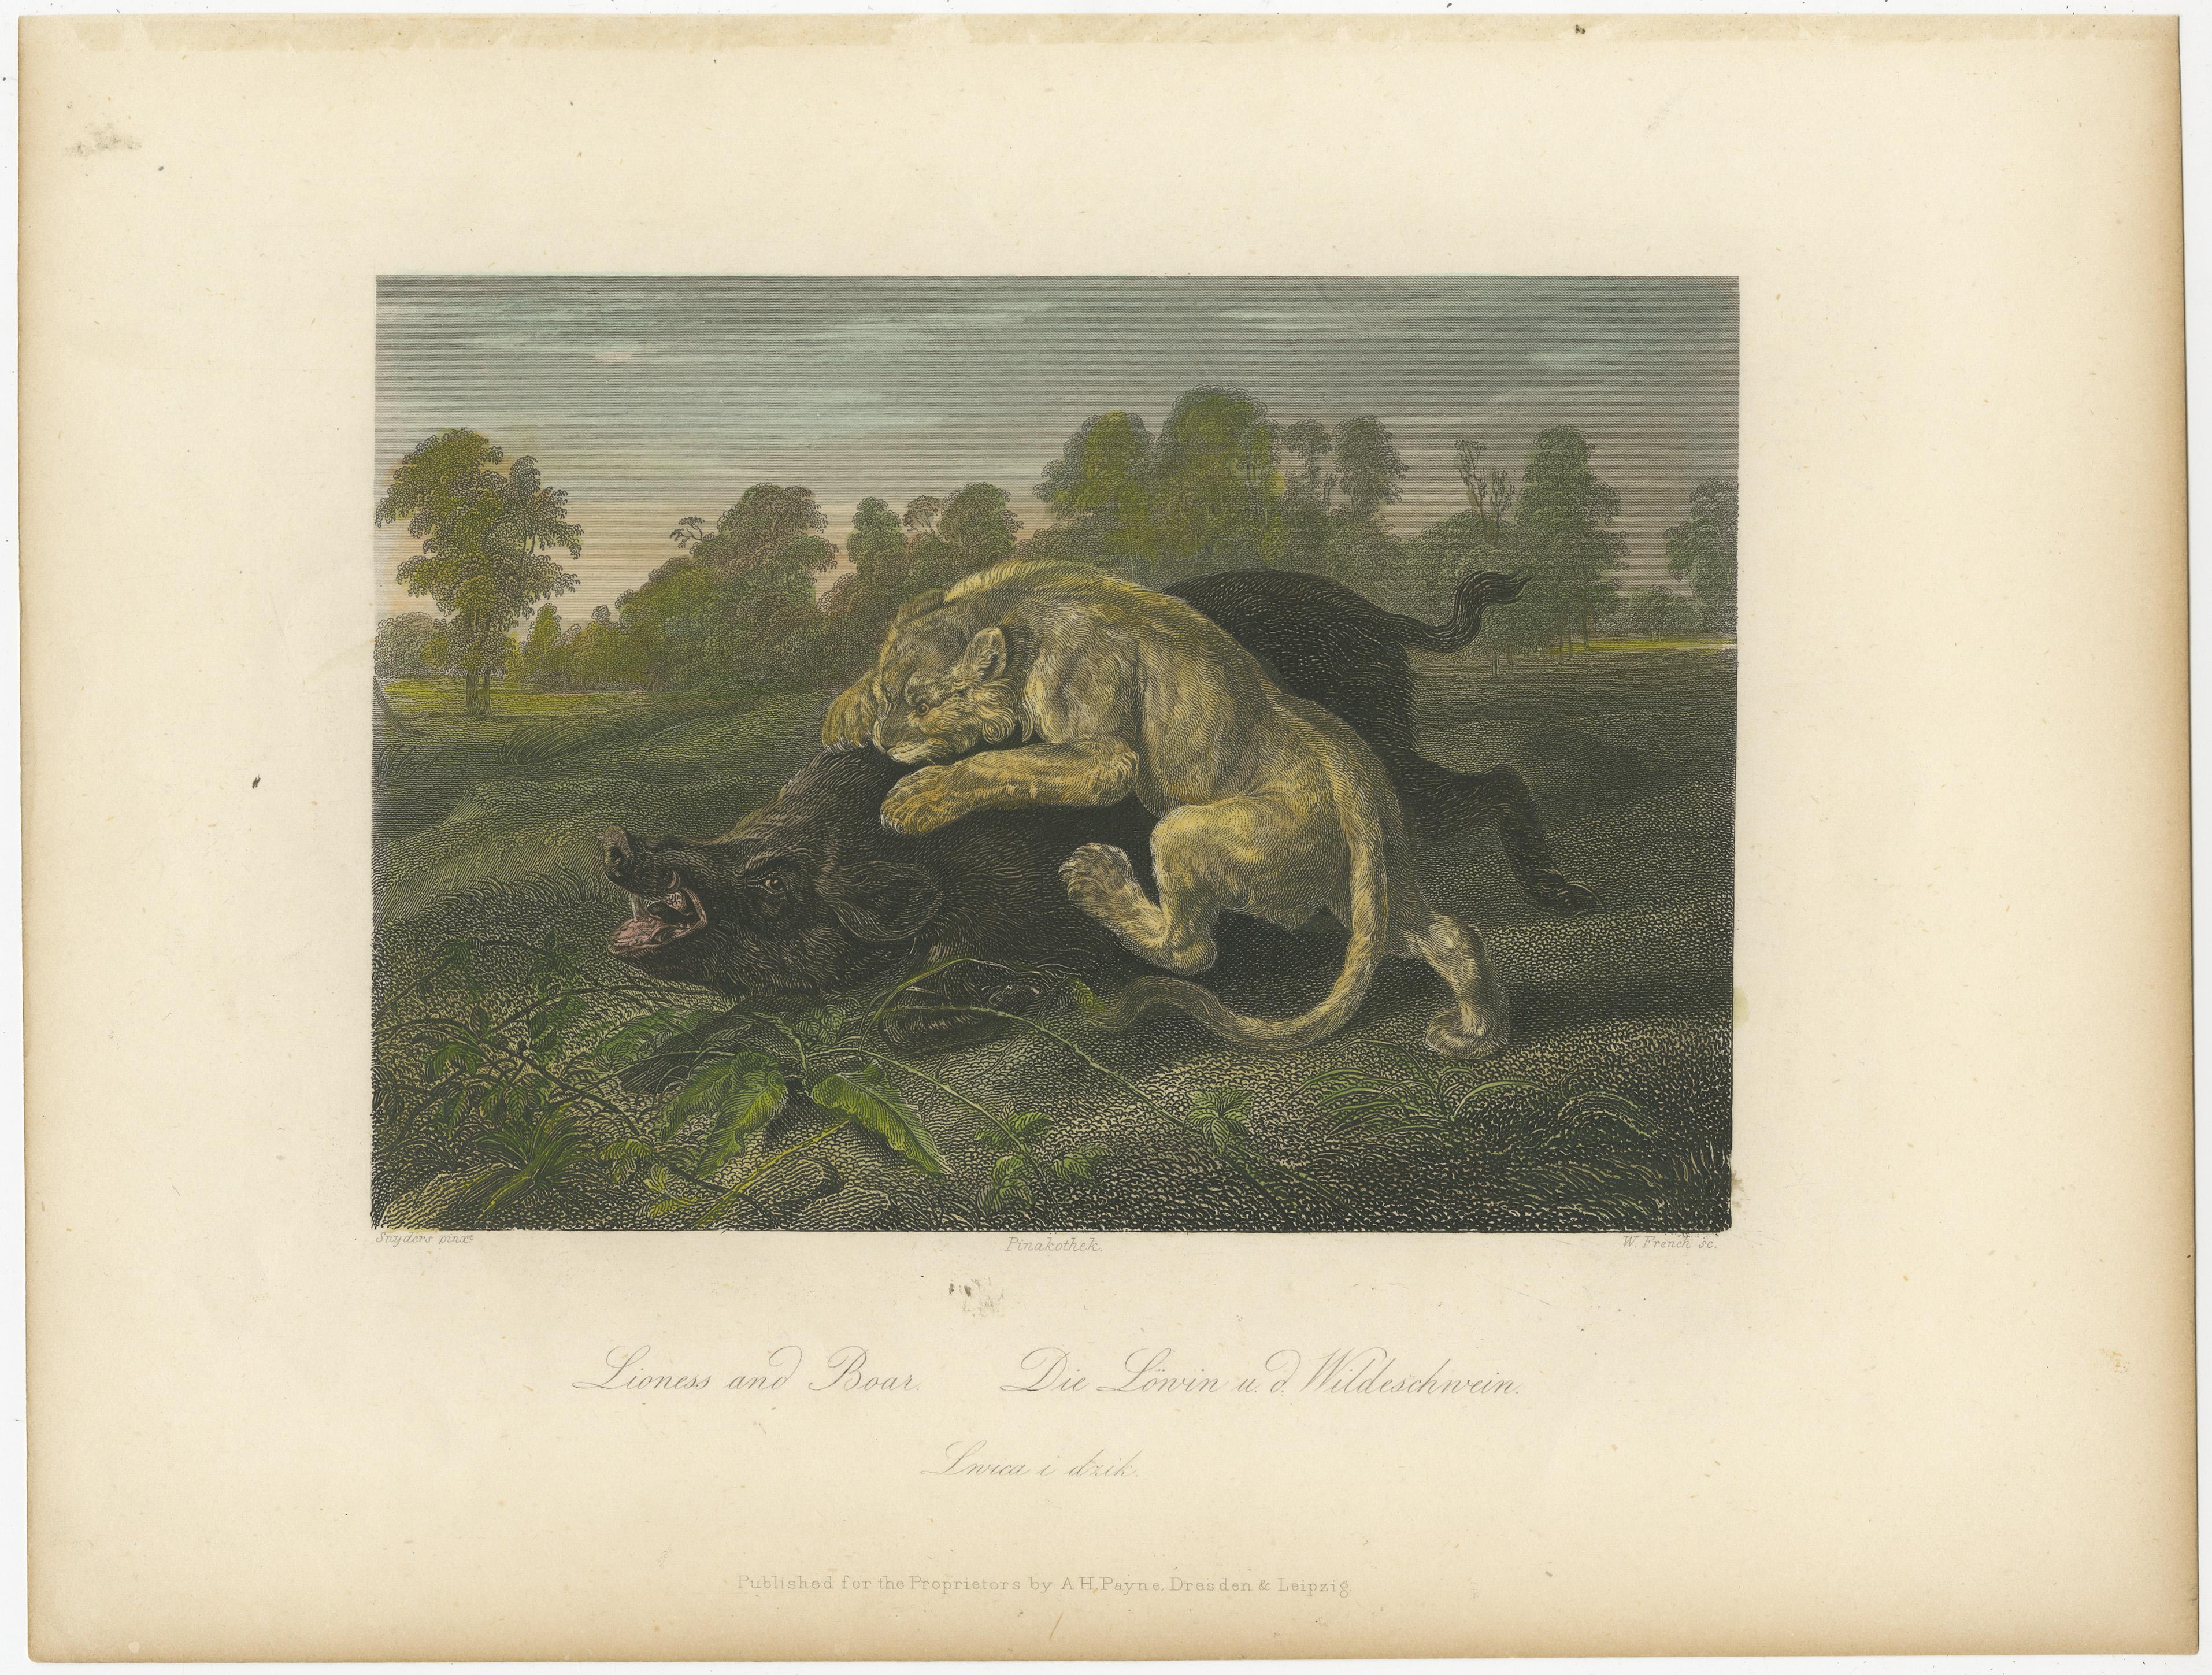 Antique print titled 'Lioness and Boar'. Original steel engraving and a boar. Published by A.H. Payne, circa 1860.